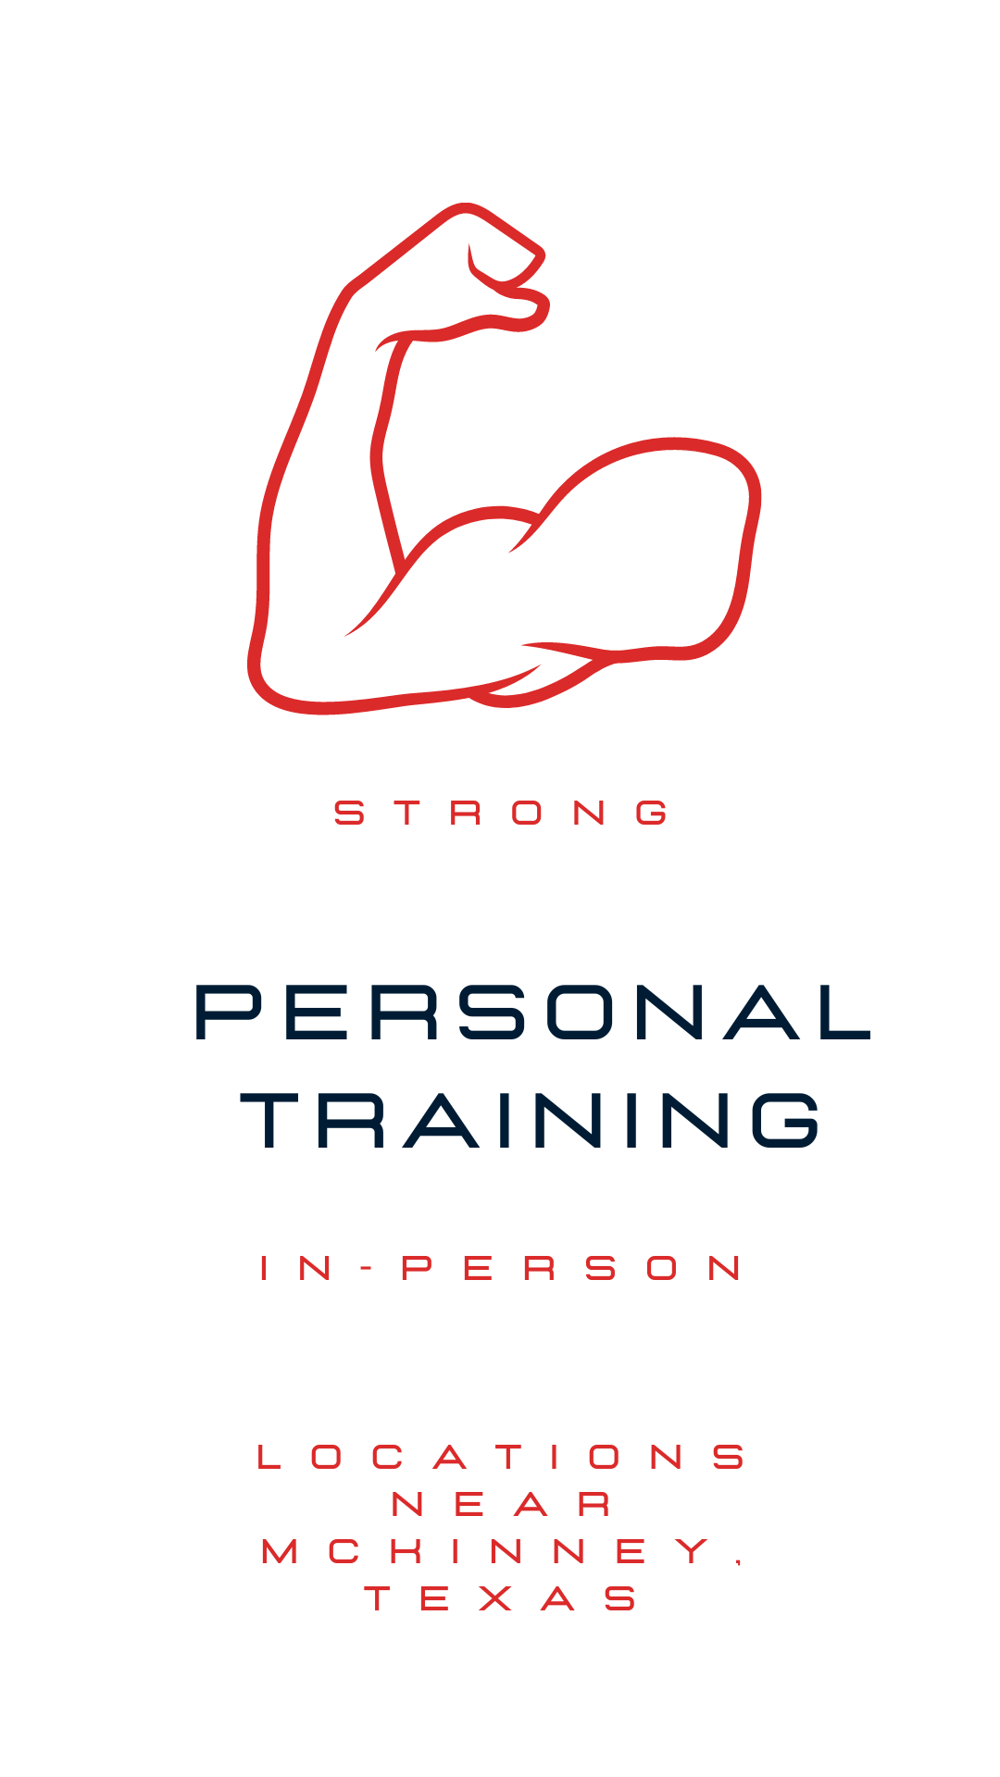 Personal fitness training icon for in-person training near McKinney, Texas